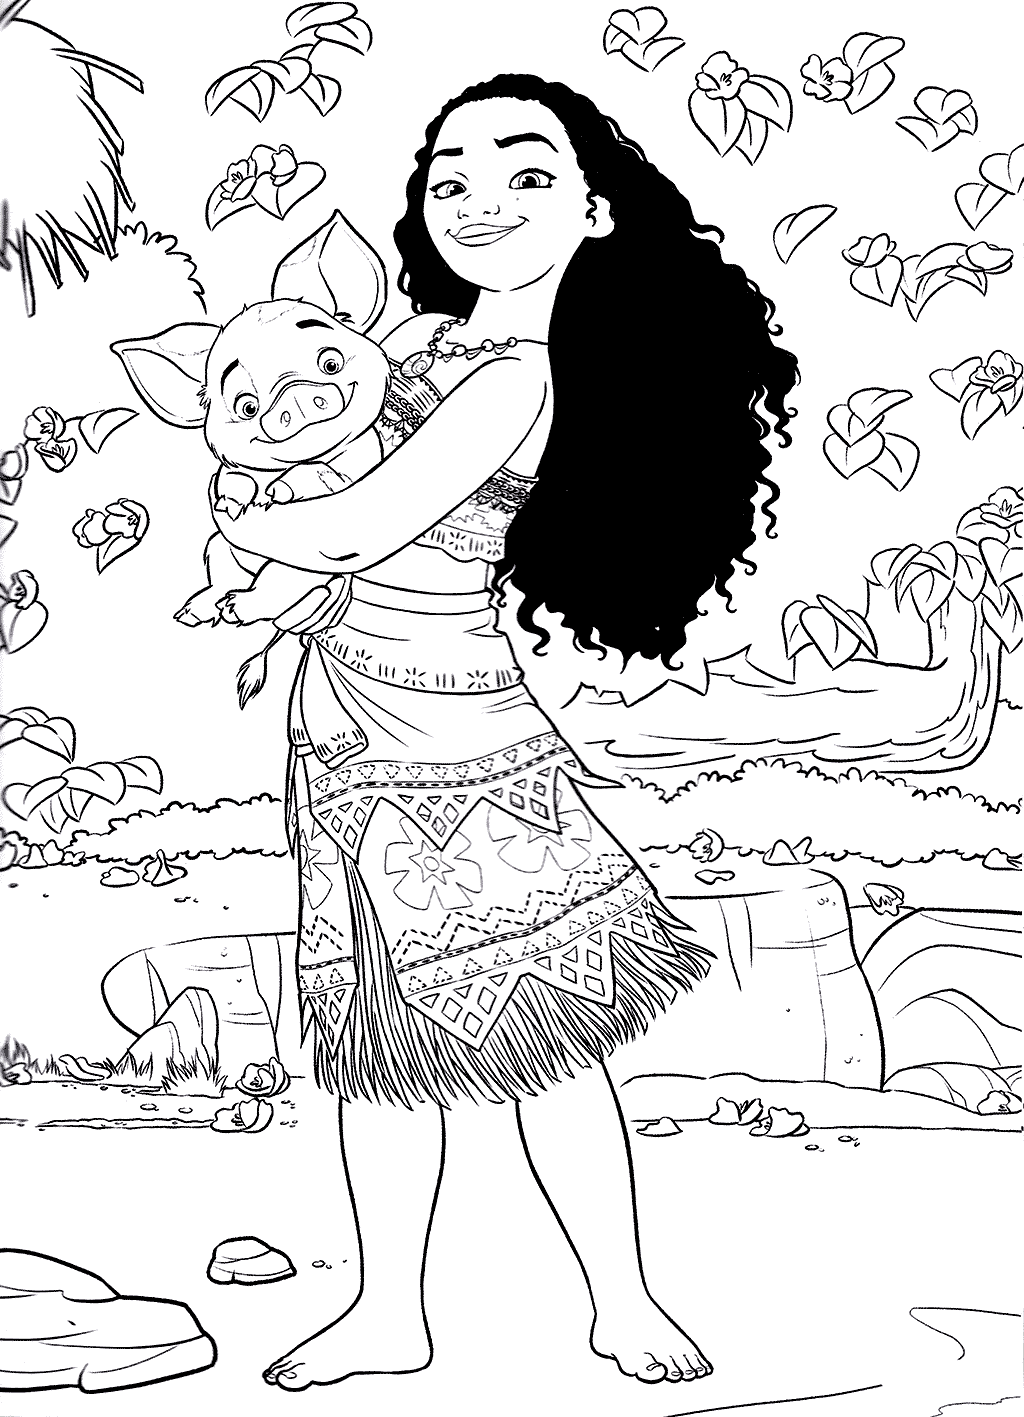 25 Of The Best Ideas For Kids Coloring Pages Moana Home Family 